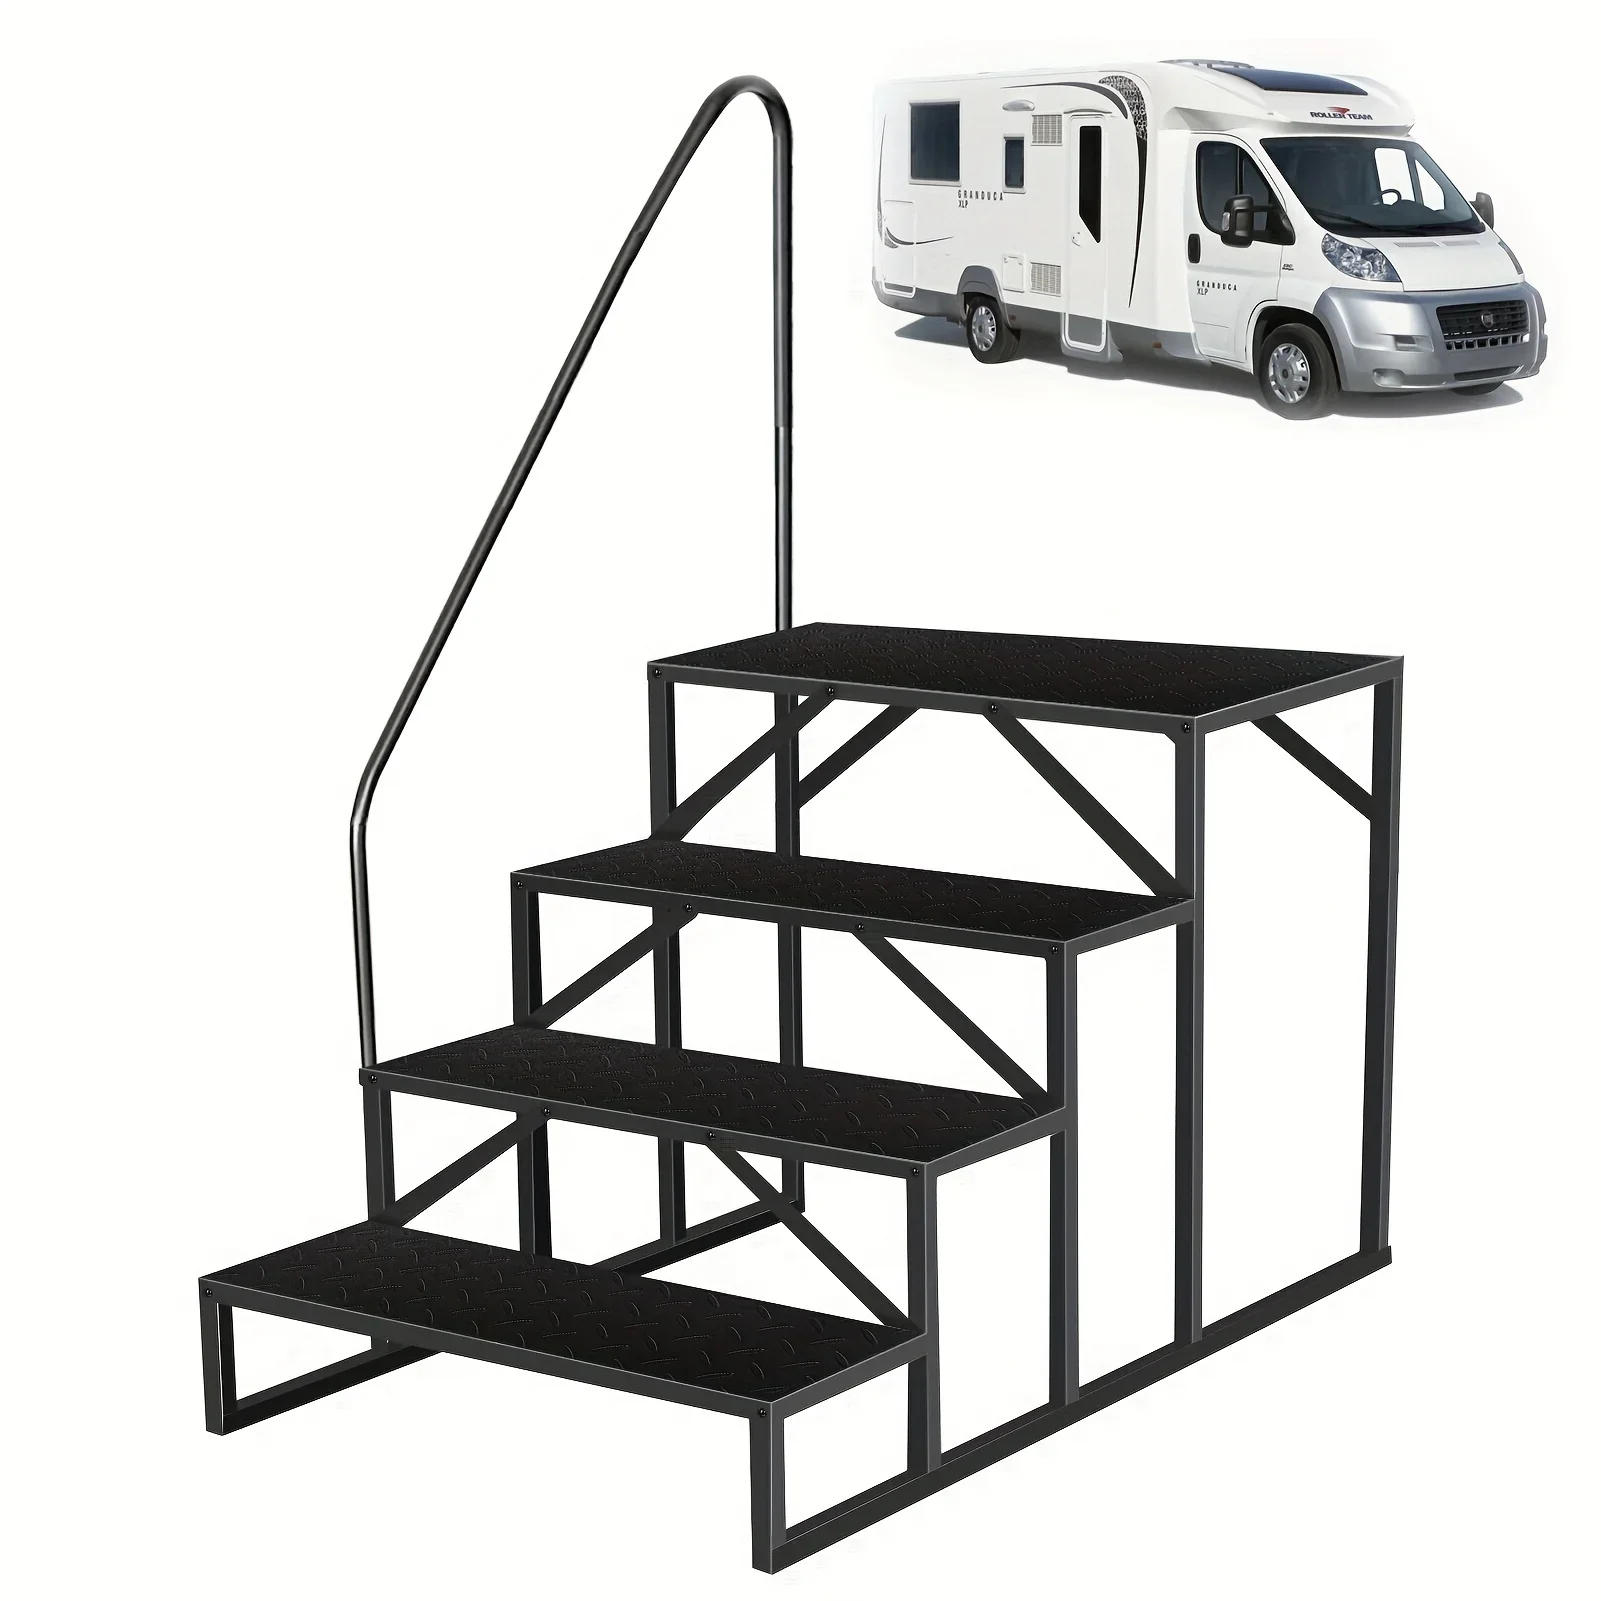 

RV with Handrail, Heavy Duty 4 Step RV Stairs with Anti-Slip Pedals, Upgraded Outdoor RV Ladder with Sturdy Handrail, Portable M